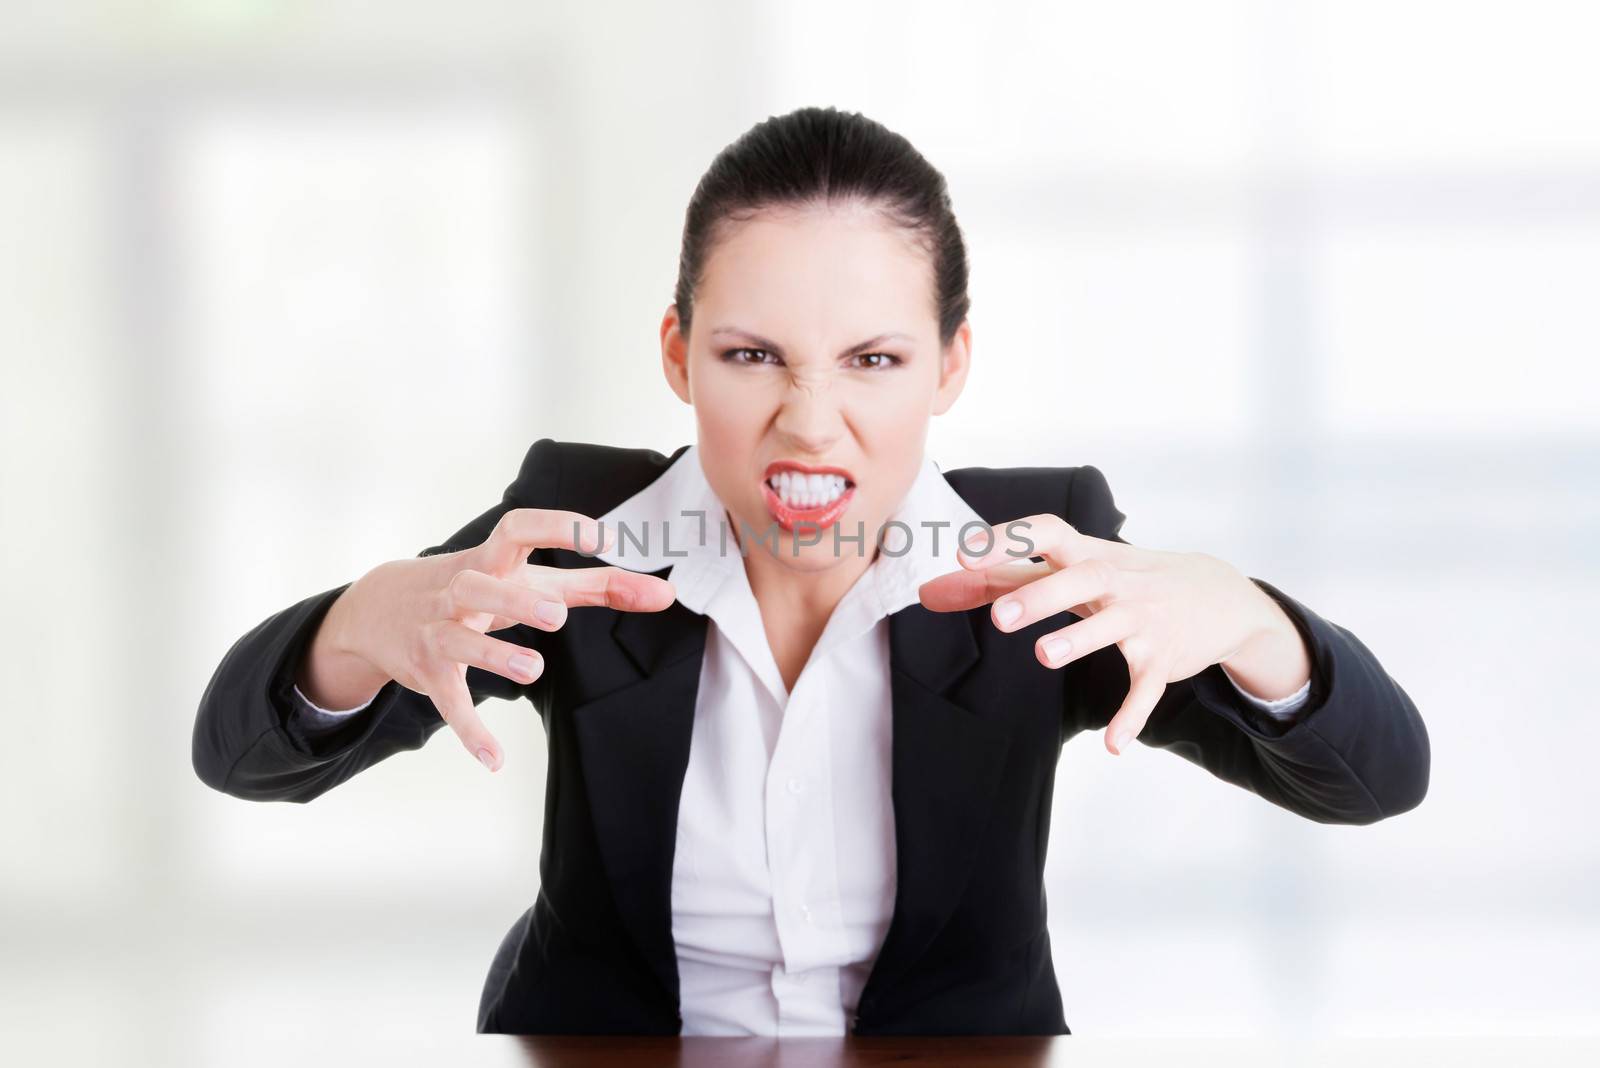 Angry businesswoman at the desk, isolated on white background